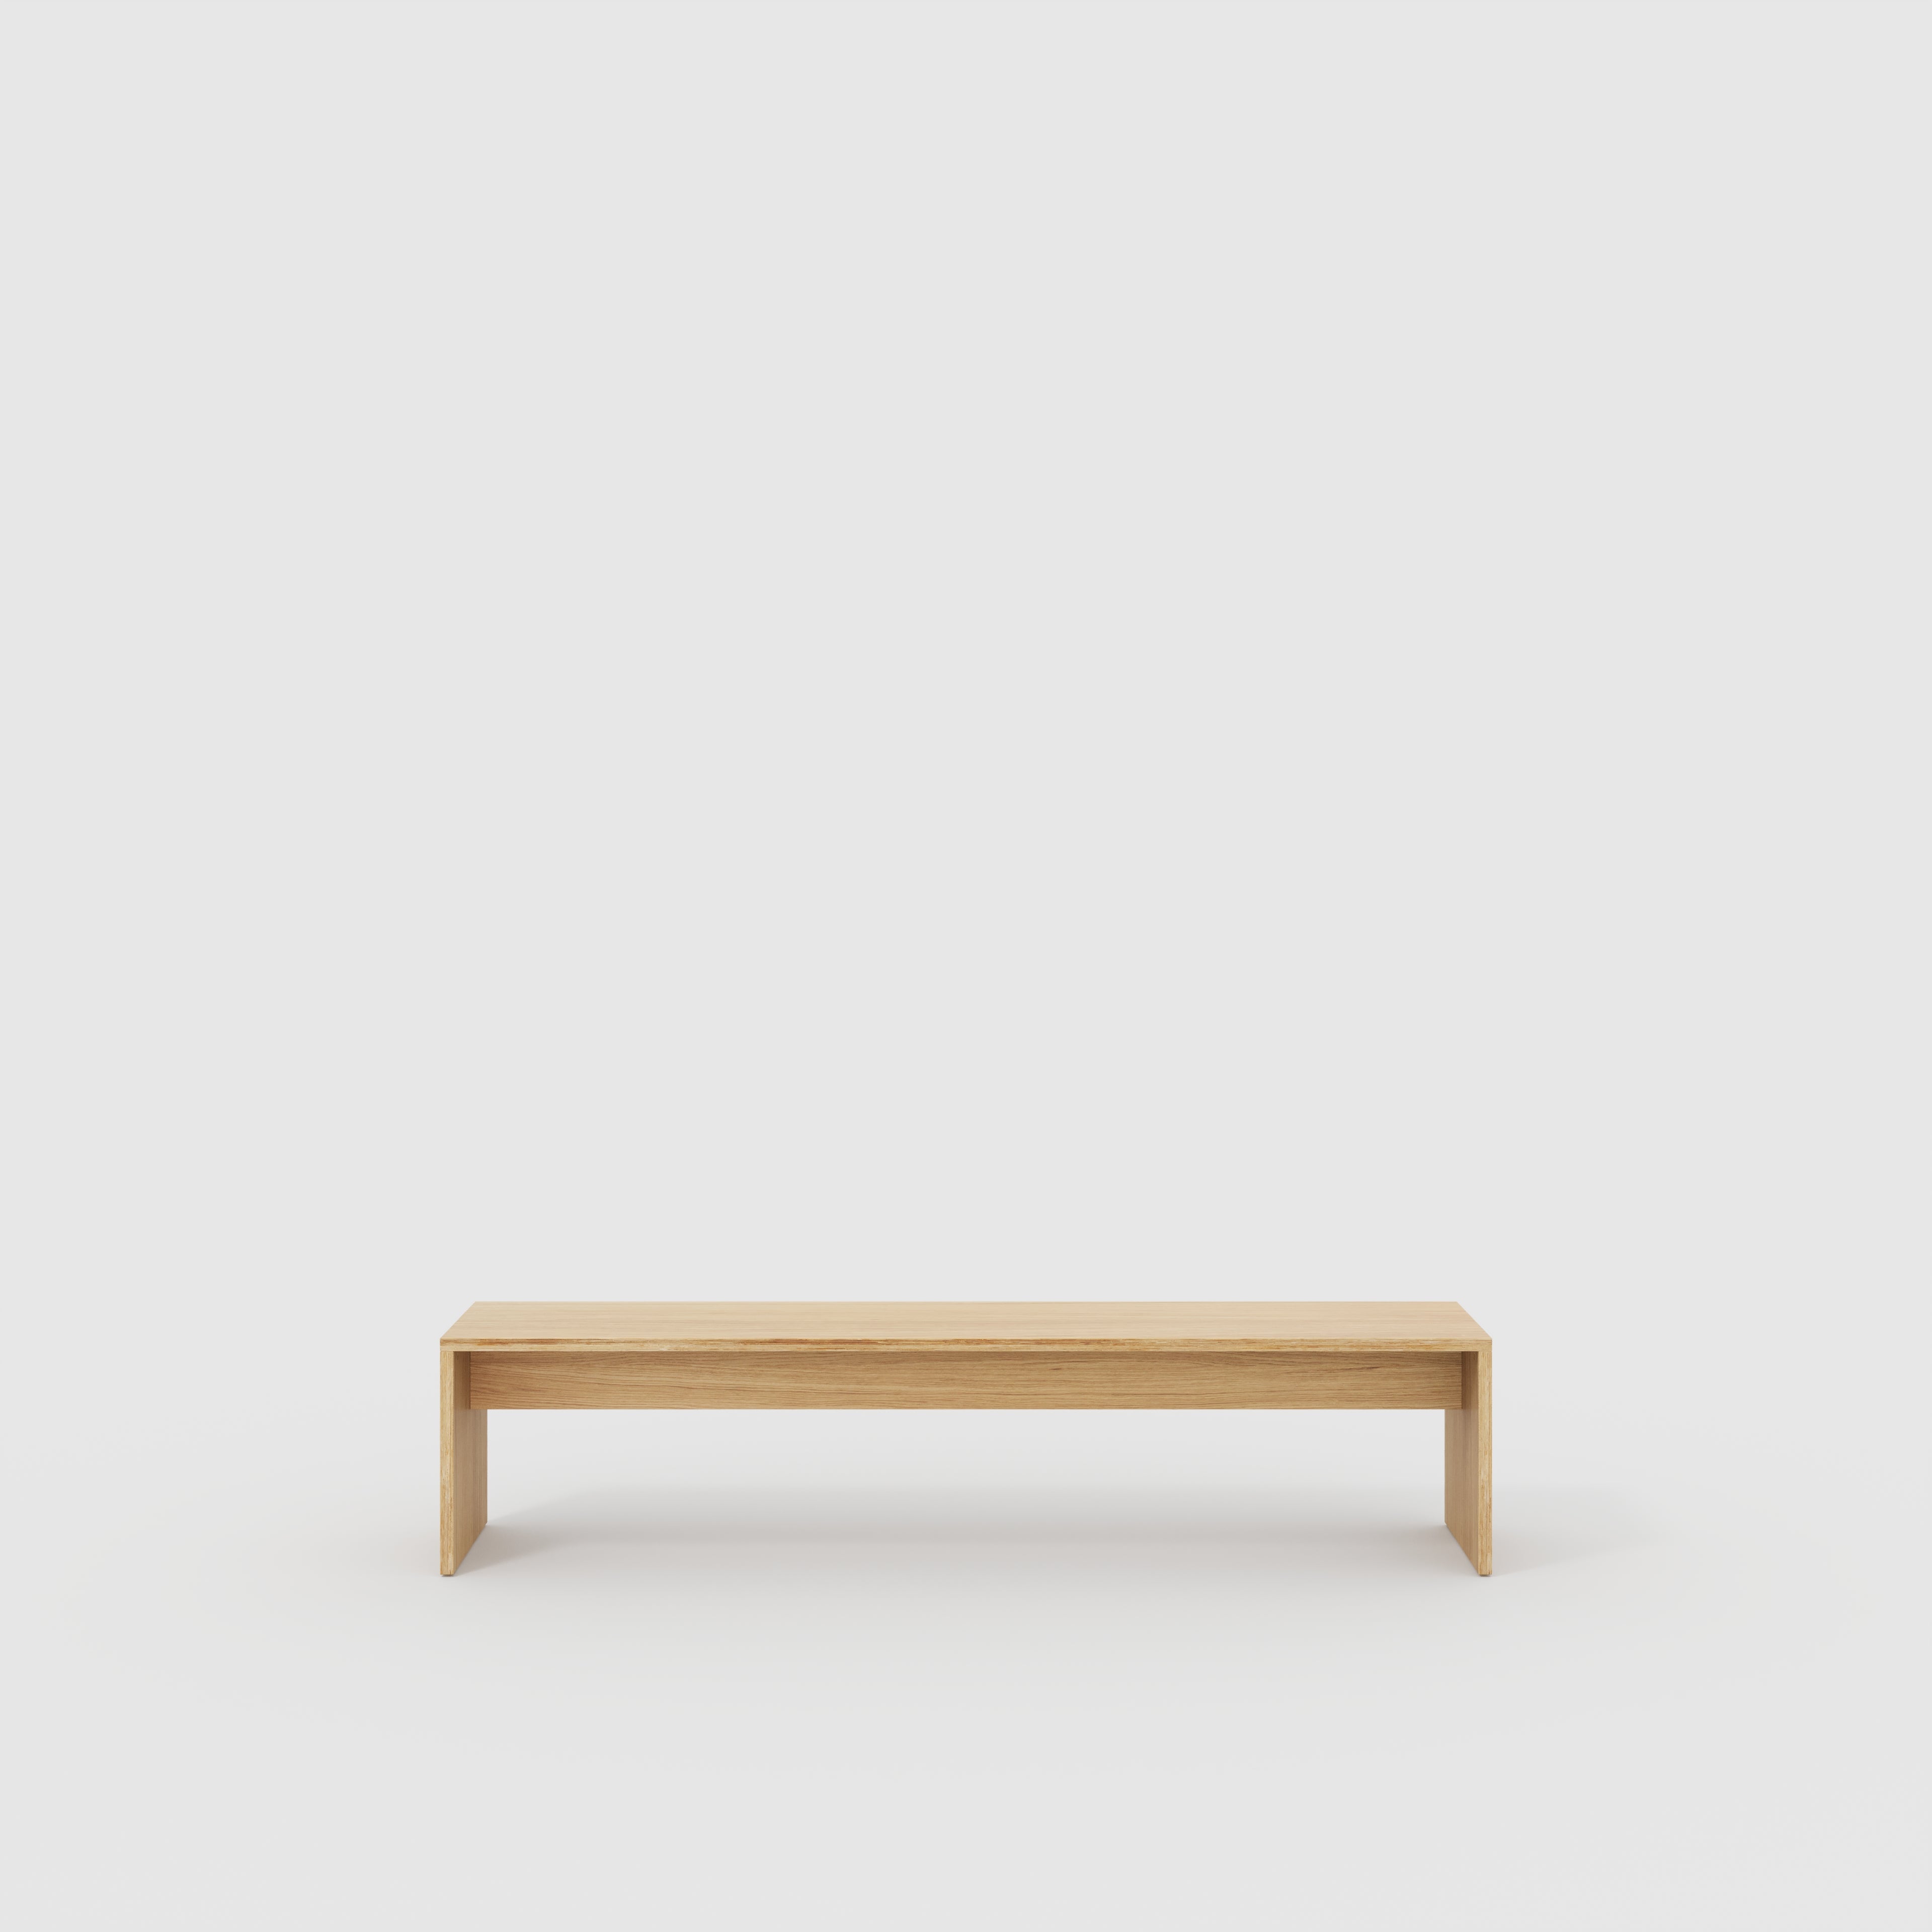 Bench Seat with Solid Sides - Plywood Oak - 2000(w) x 400(d)